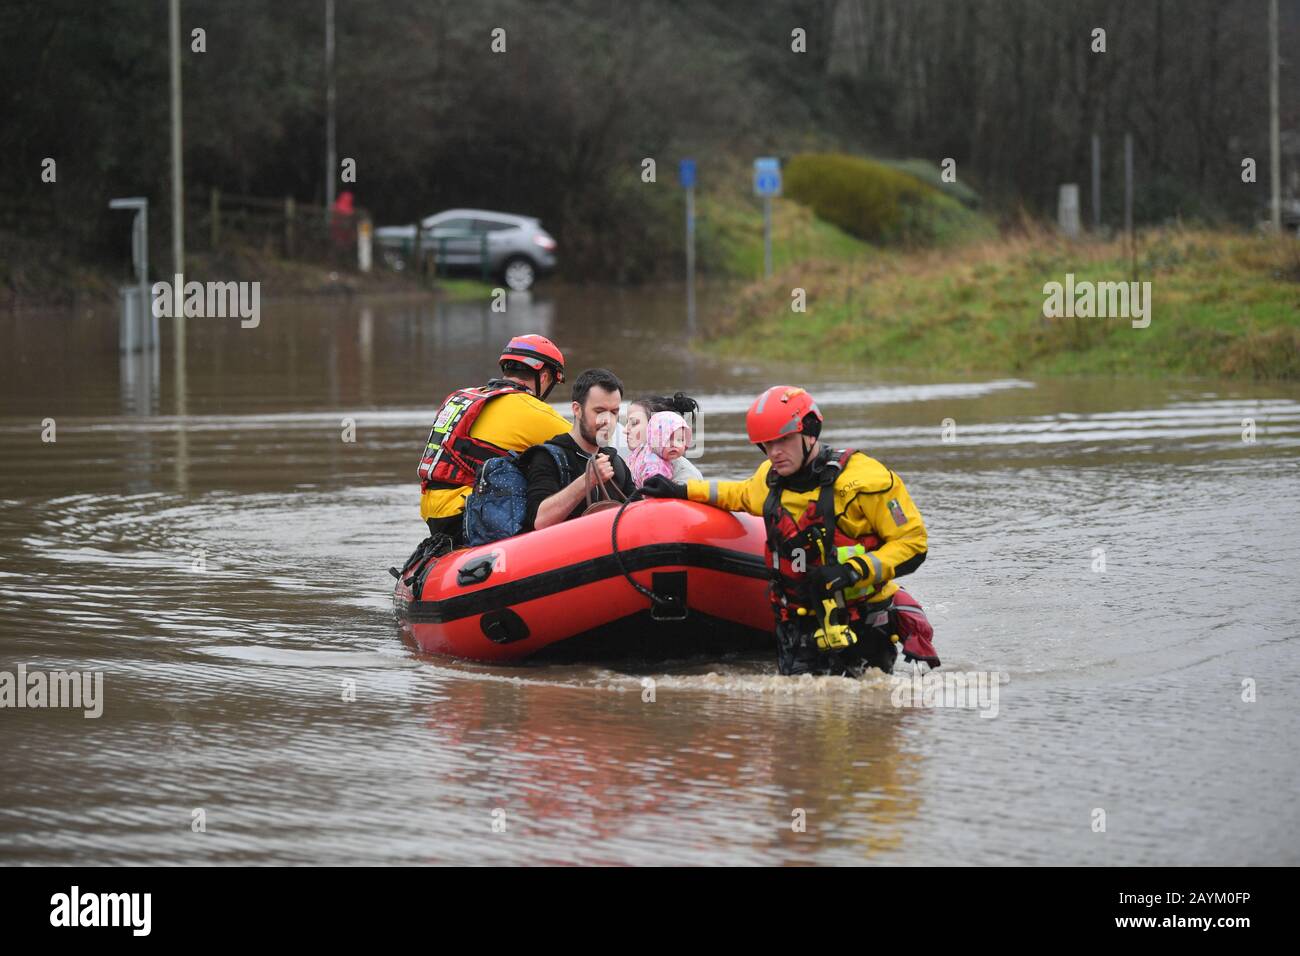 Rescue operations underway and a family is taken to safety, after flooding in Nantgarw, Wales as Storm Dennis hit the UK. Stock Photo